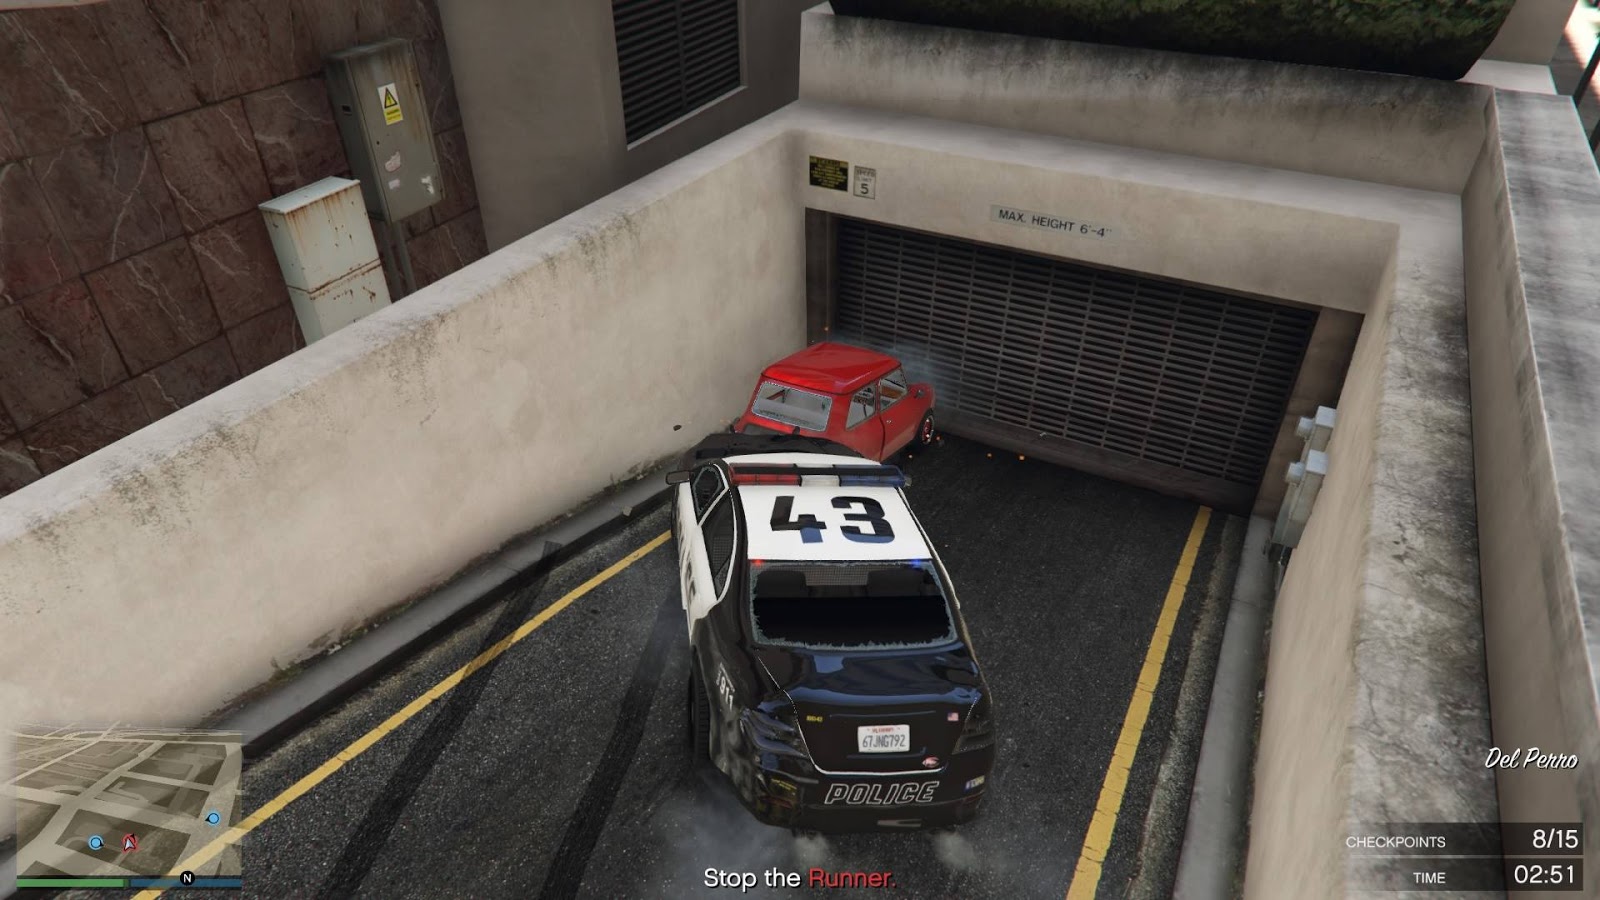 GTA Online’s New Modes Are More Creative Than You’d Expect